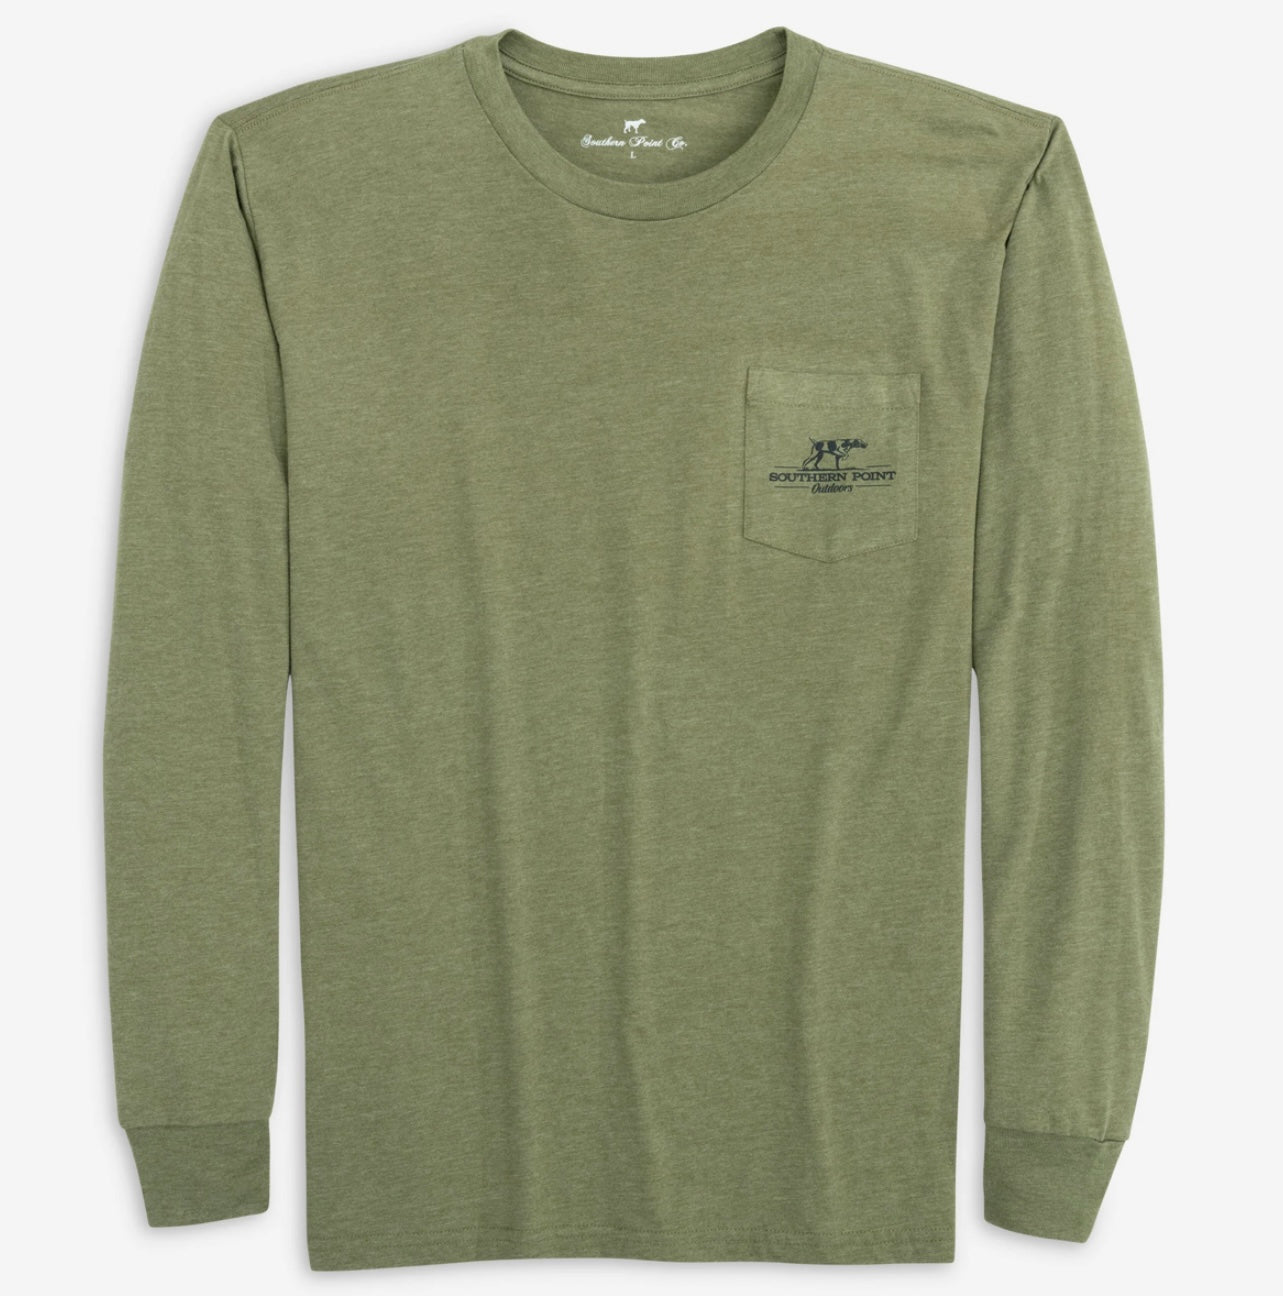 SPC Outdoors Long Sleeve Tee by Southern Point Co.